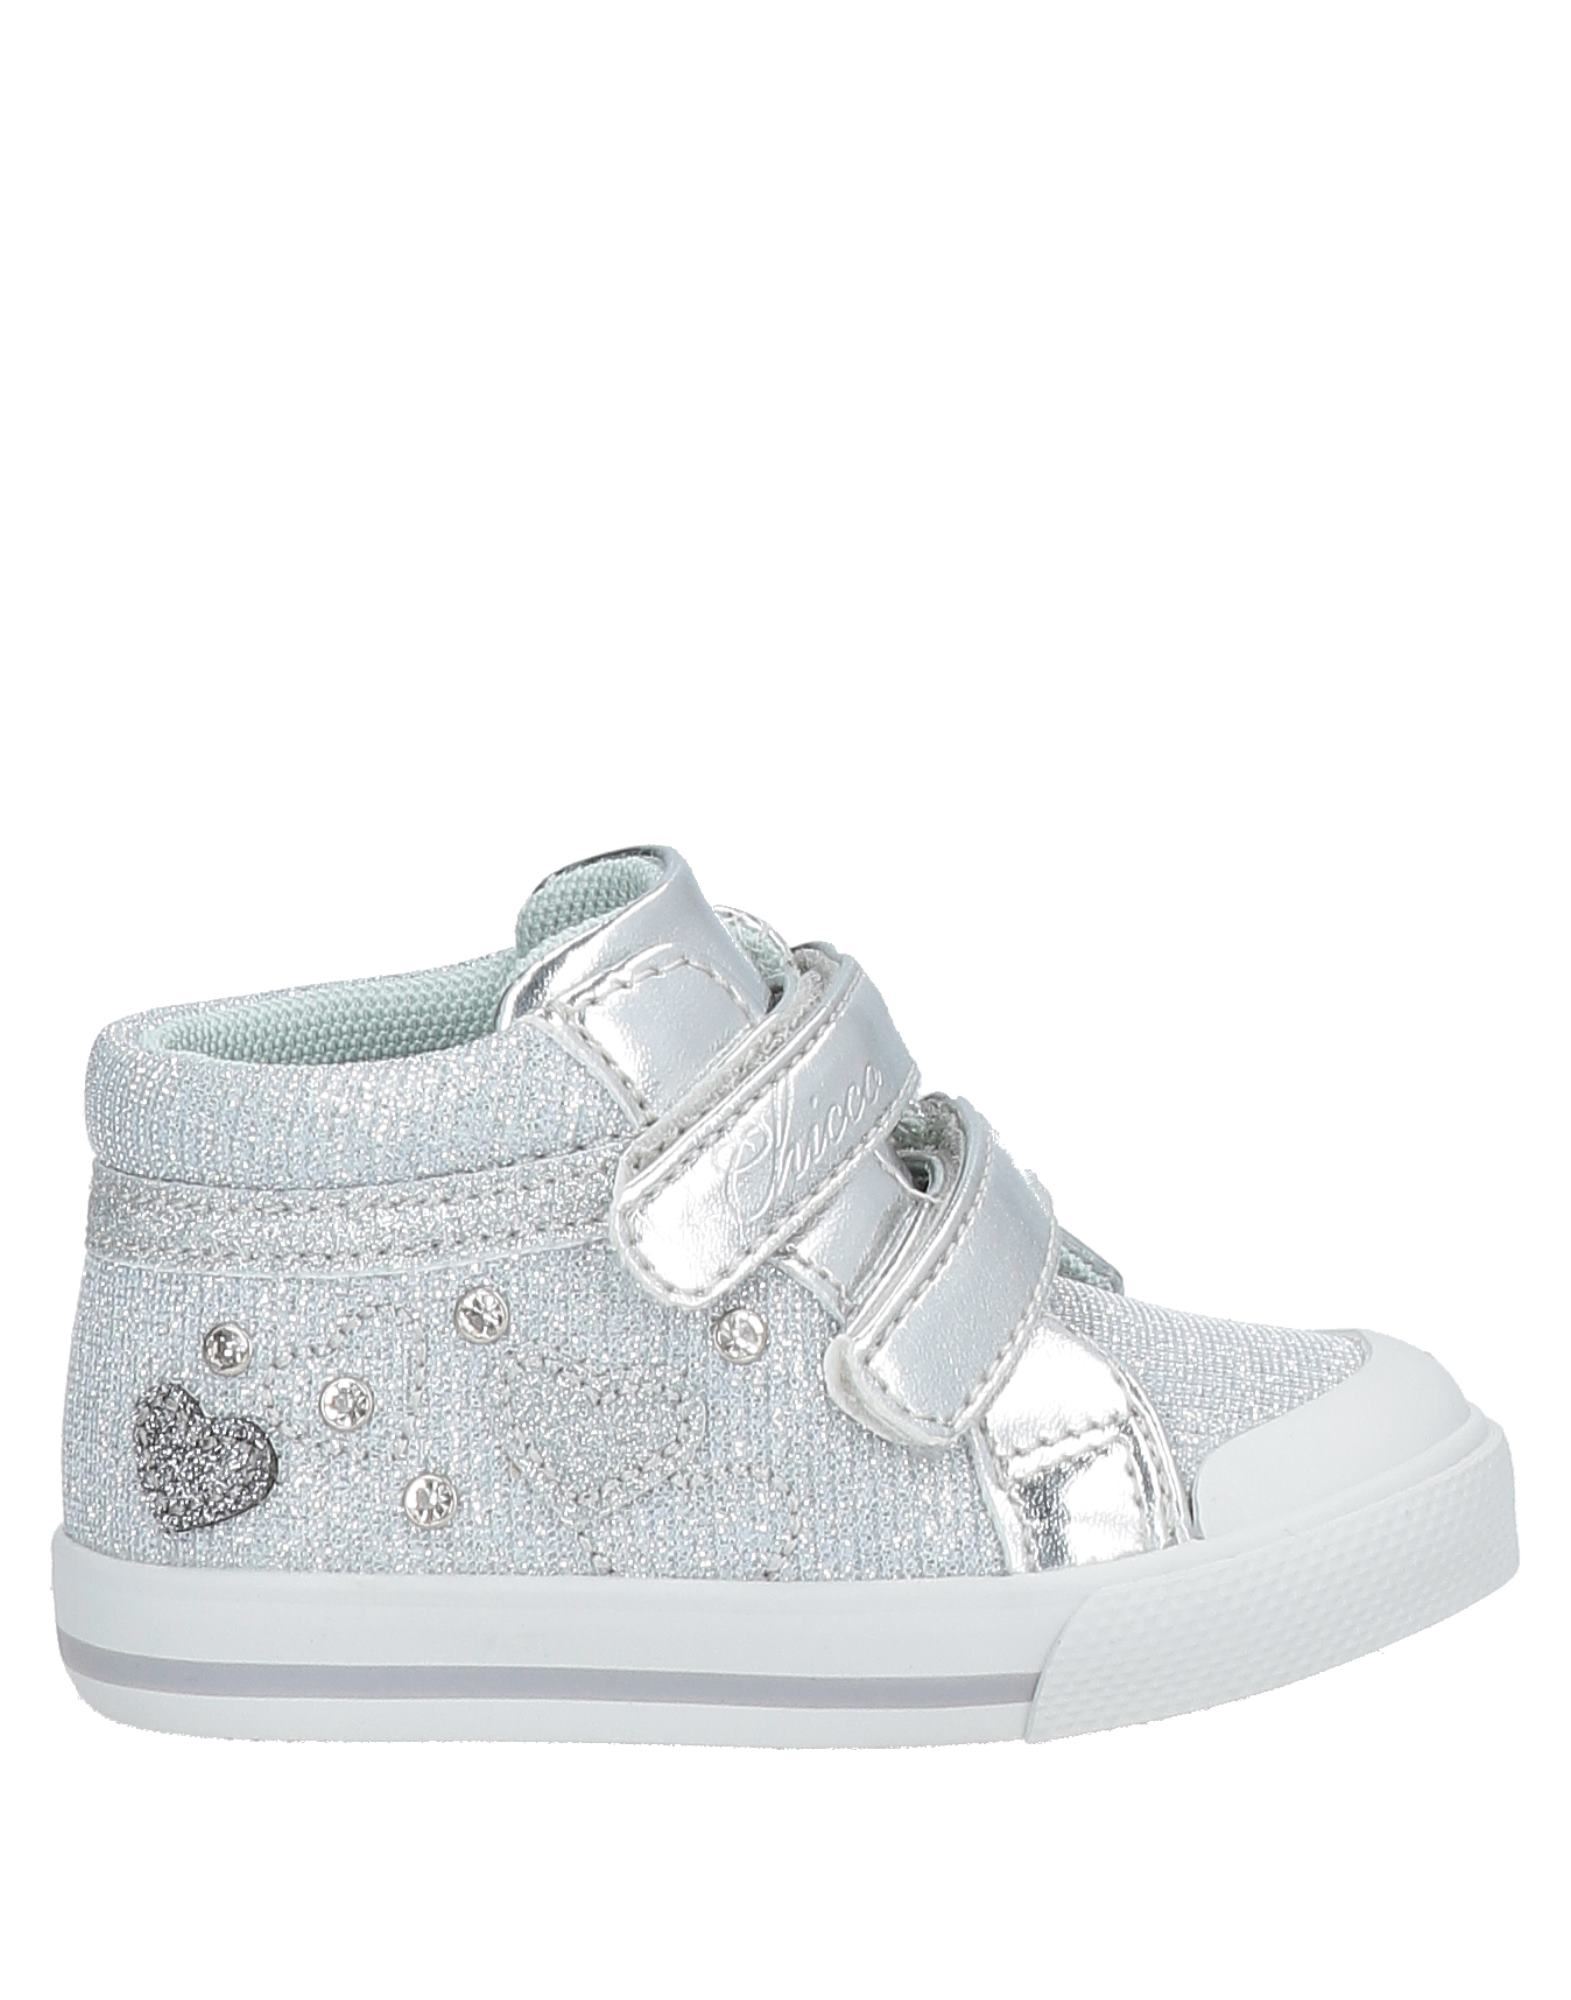 CHICCO Sneakers Kinder Silber von CHICCO